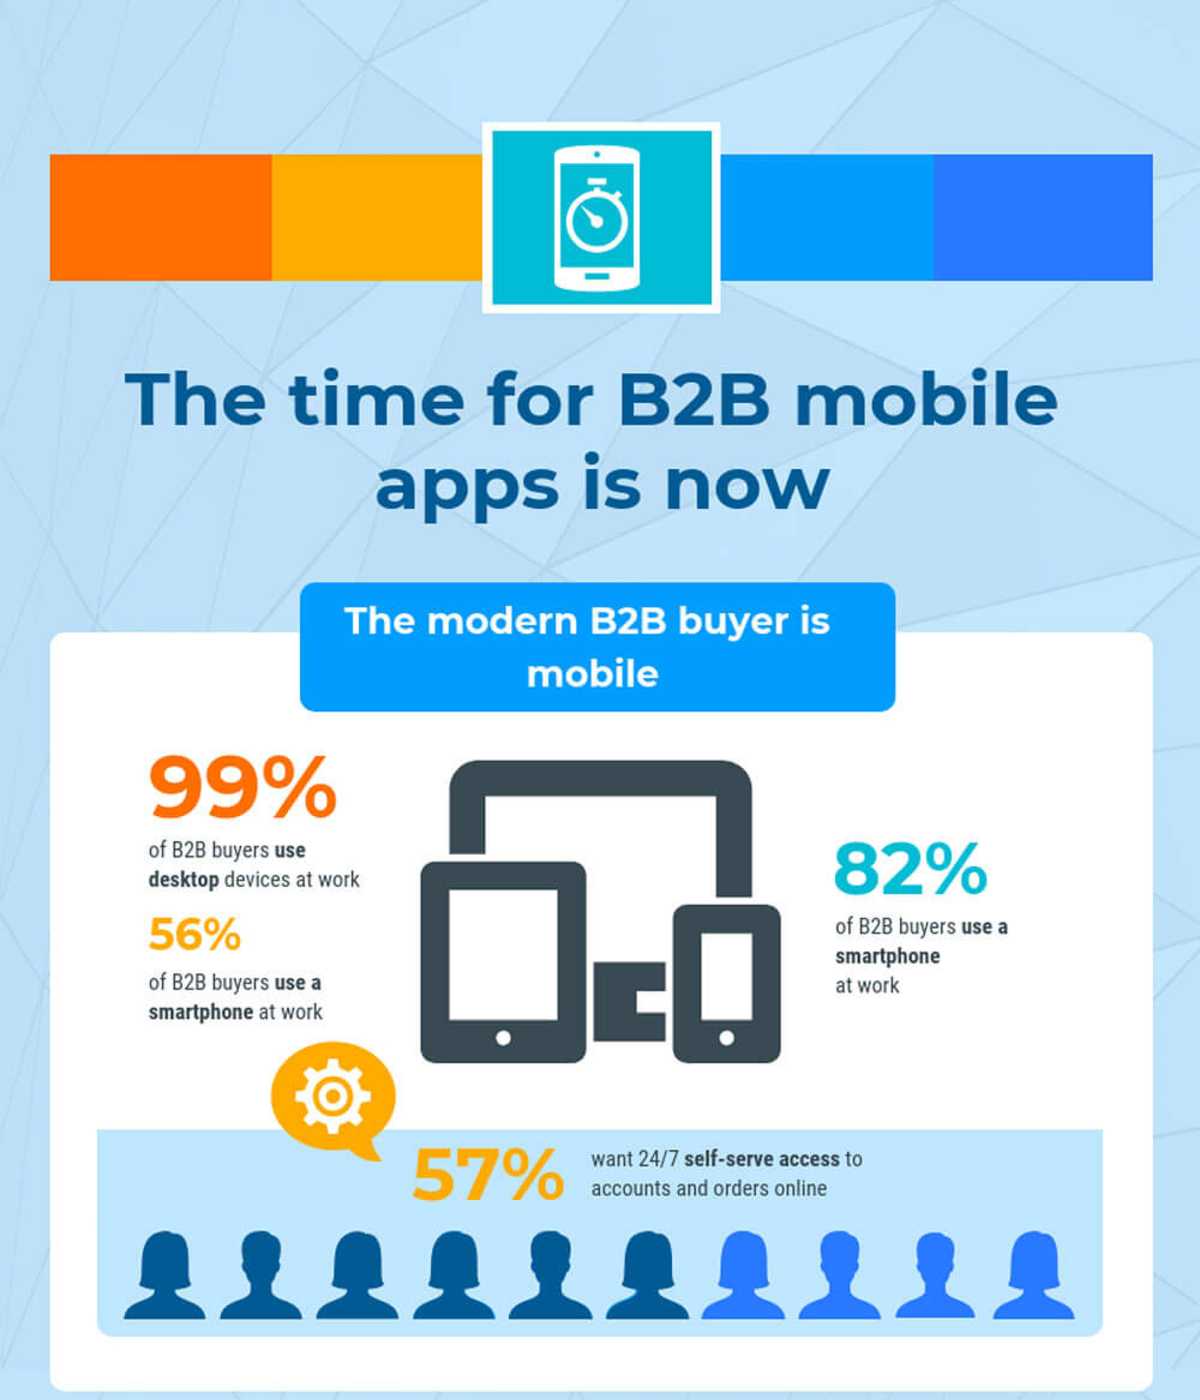 the-time-for-mobile-b2b-apps-is-now.jpg 